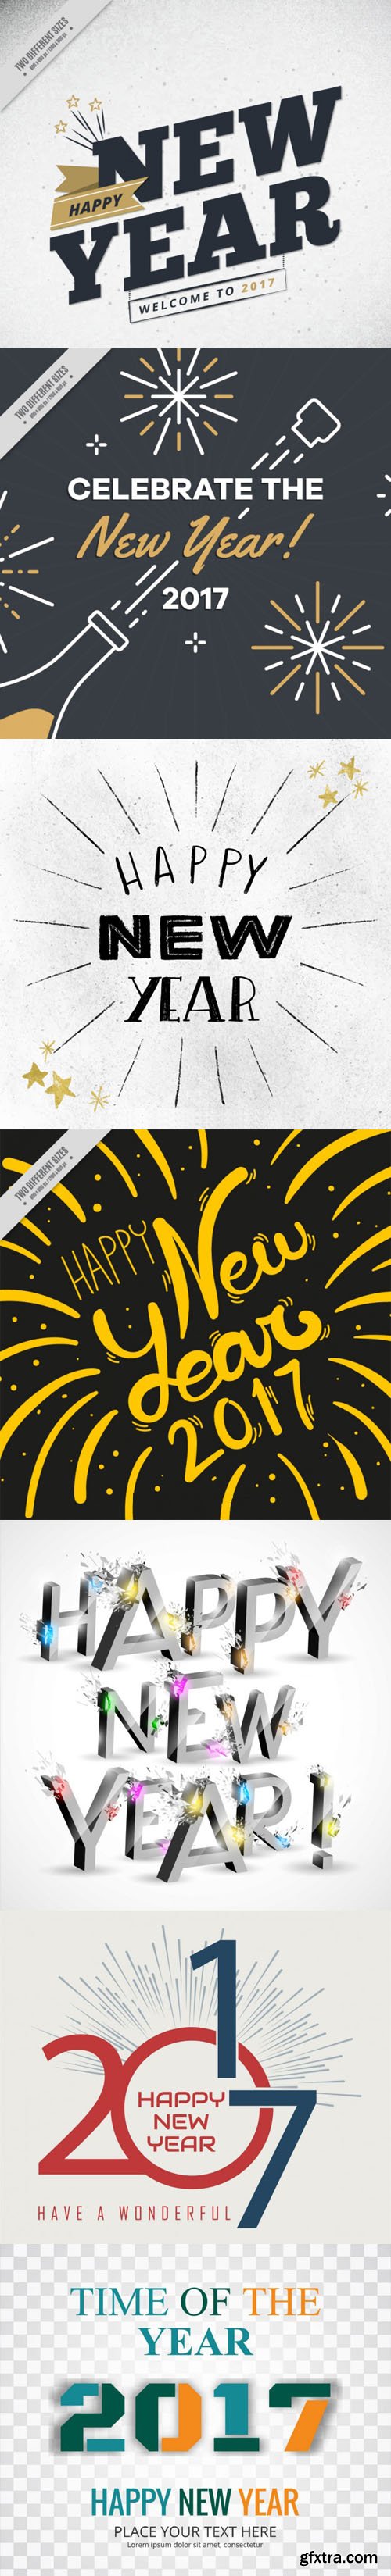 Happy New Year 2017 Backgrounds in Vector [AI/EPS]